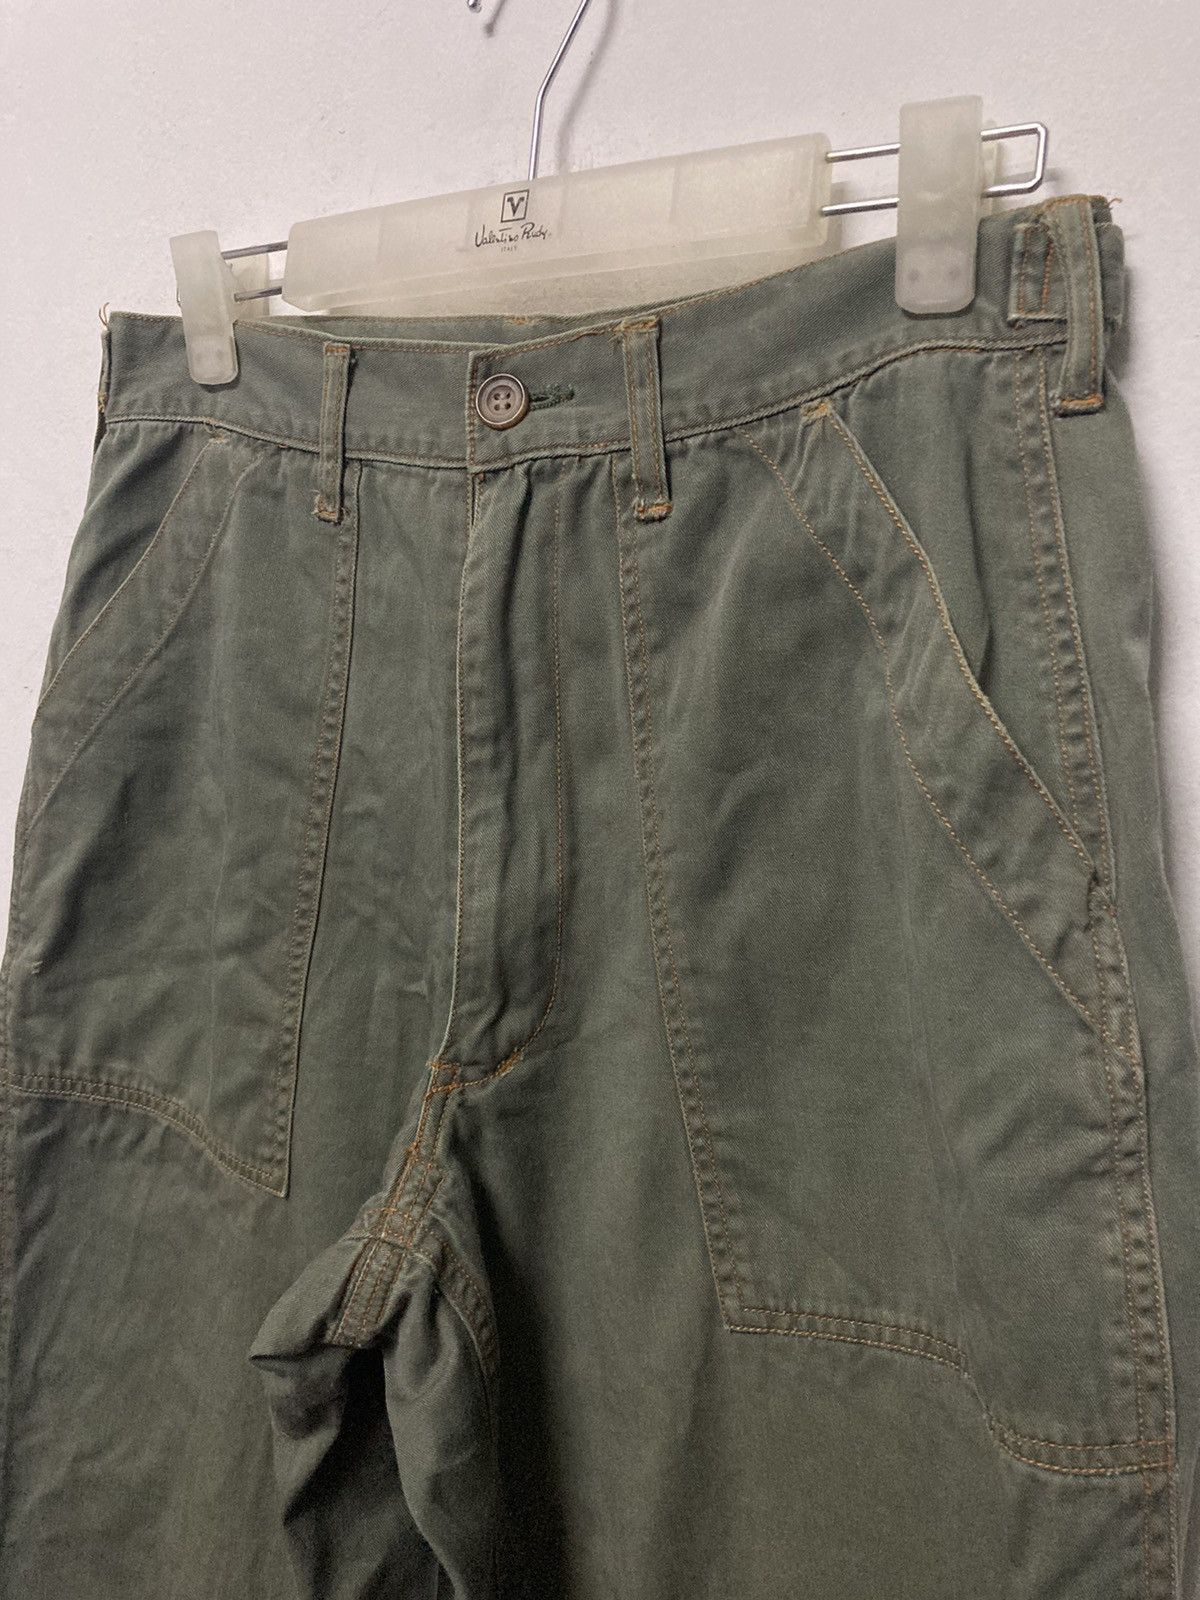 Vintage Soldout Japanese Brand Large Pocket Army Style Pants - 7